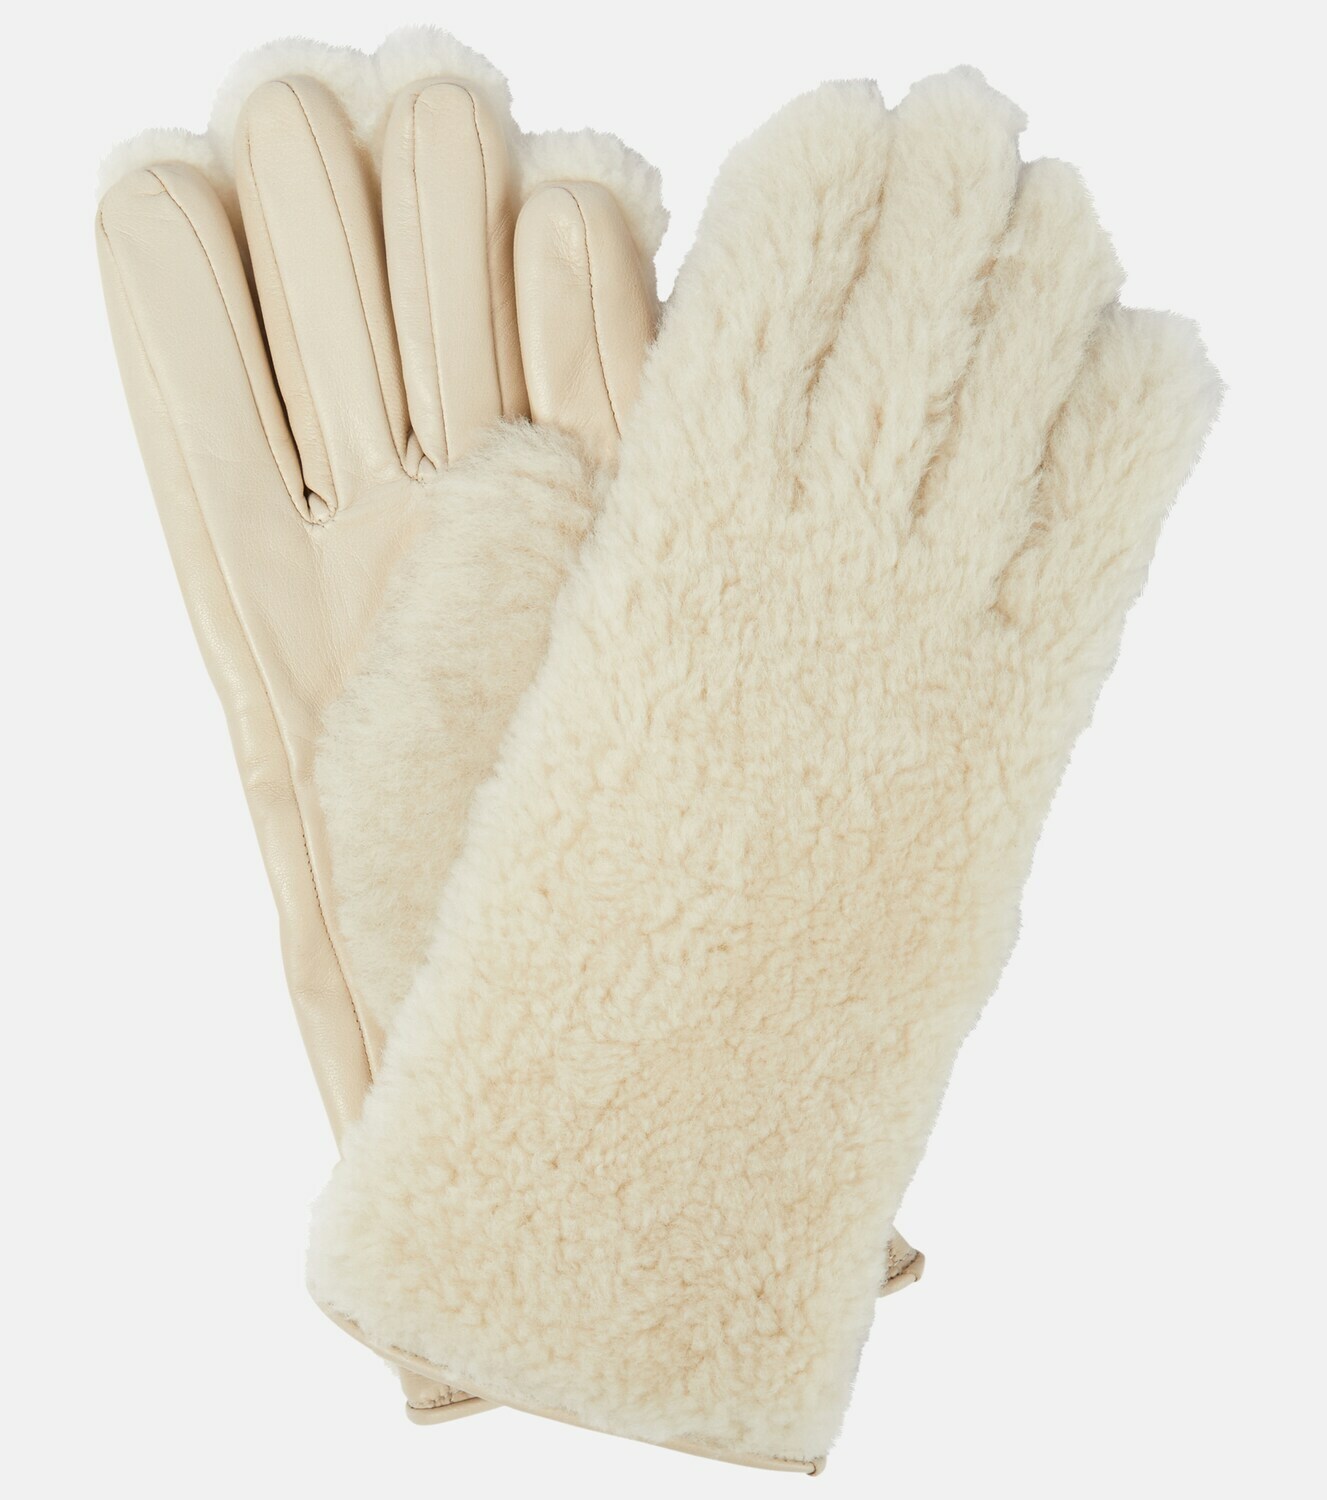 Chloe - Shearling and leather gloves Chloe